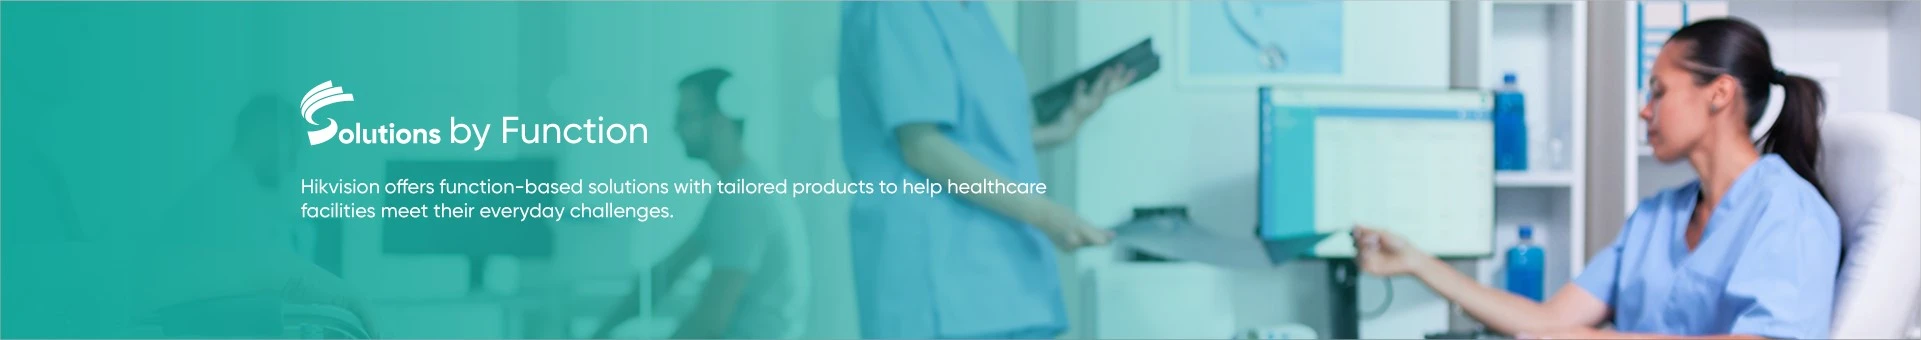 Hikvision offers function-based solutions with tailored products to help healthcare facilities meet their everyday challenges.